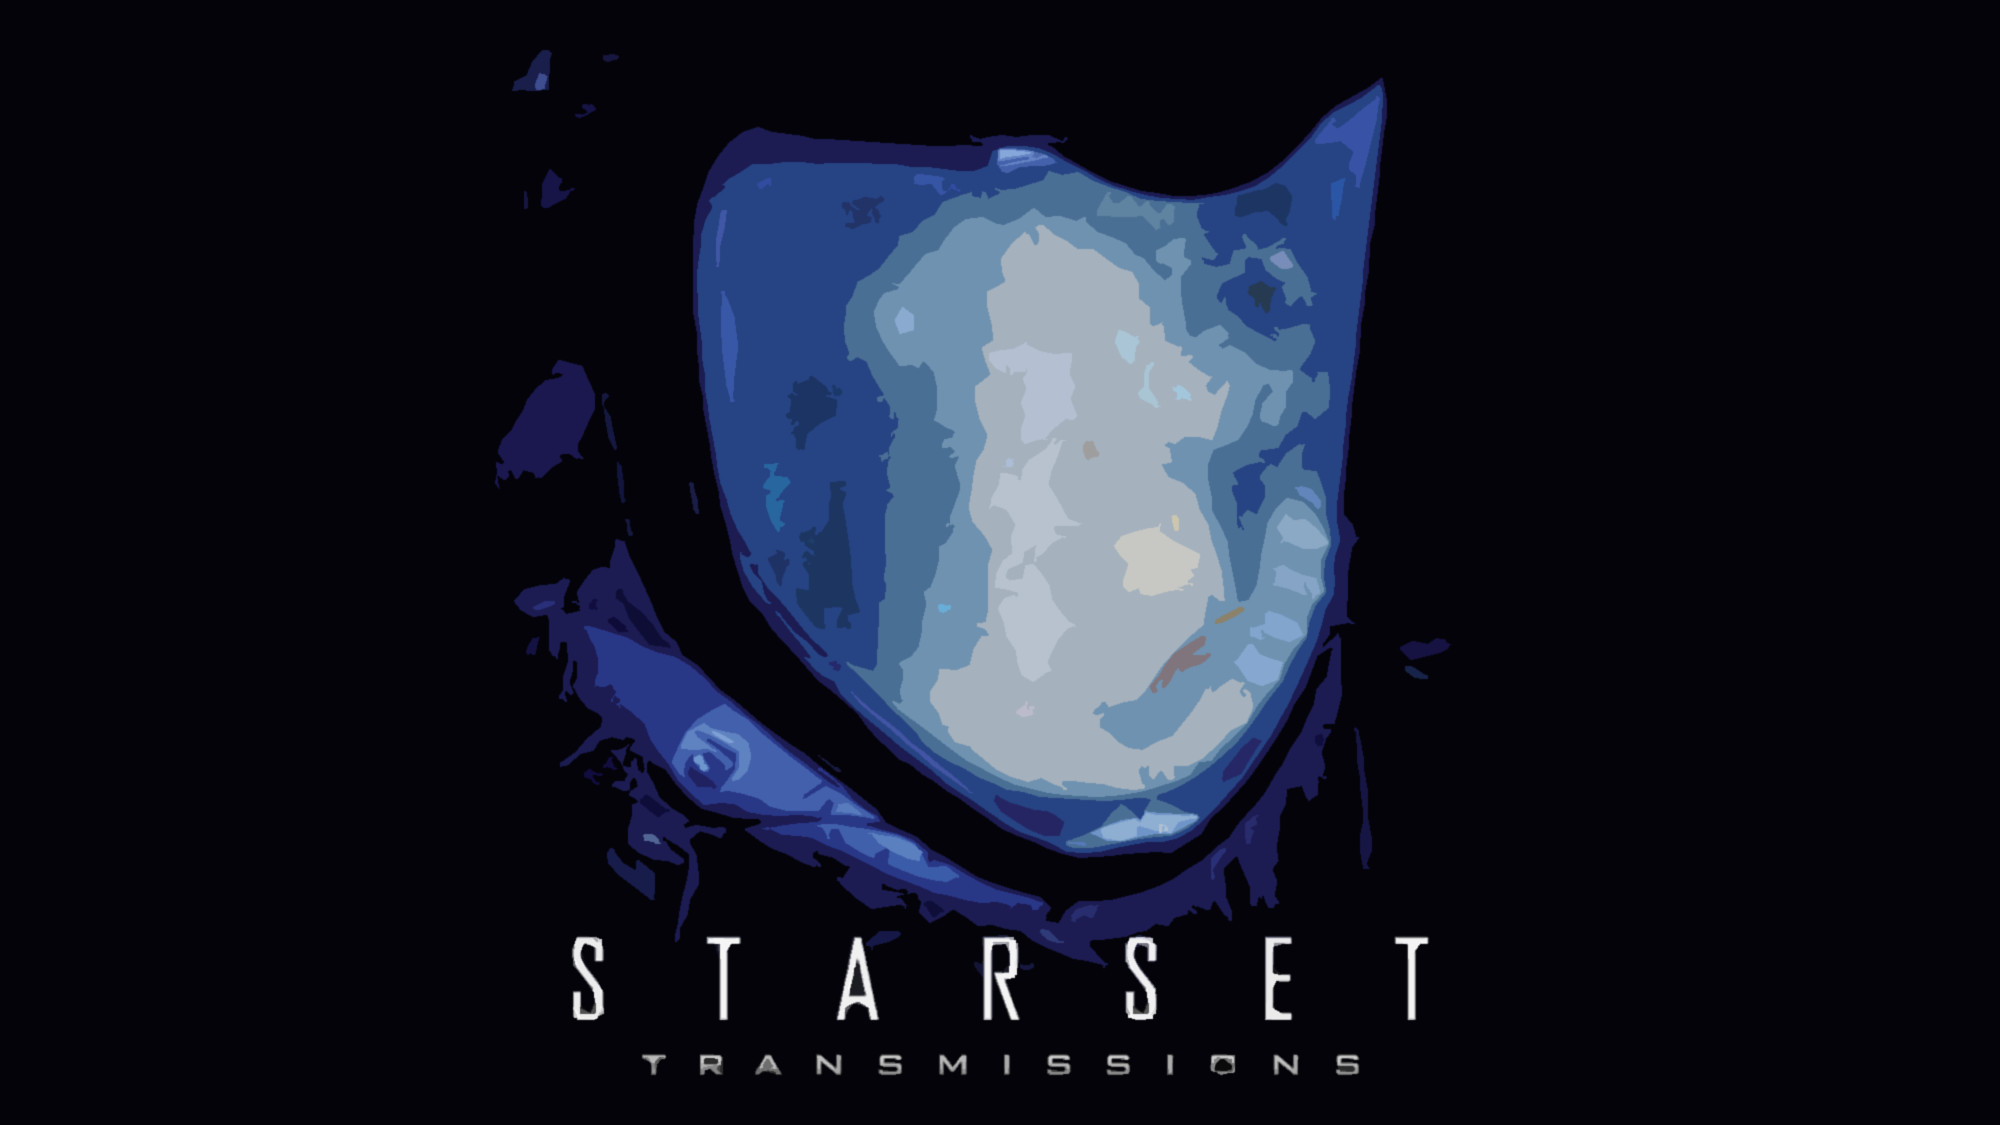 2000x1125 ... Starset Transmissions Deluxe Cover Wallpaper Art by Hokage455